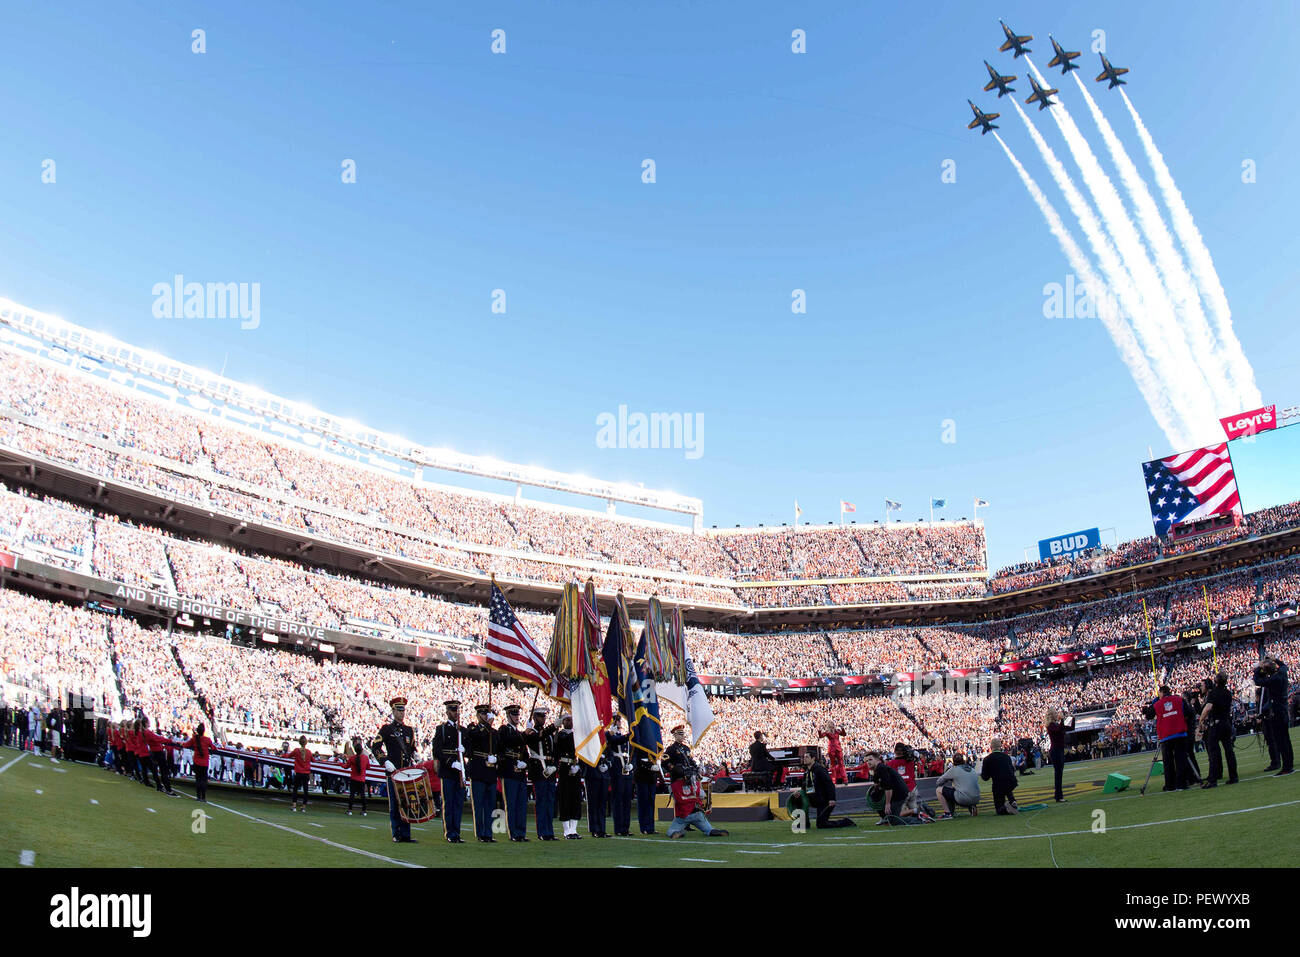 The Joint Armed Forces Color Guard presents the national colors during the opening ceremony of Super Bowl 50 Feb. 7, 2016, as the Navy’s Blue Angels fly over Levi’s Stadium, Santa Clara, Calif. The opening ceremony included the performance by a Joint Armed Services Choir followed by the singing of the national anthem by Lady Gaga. Members of The U.S. Army Band “Pershing’s Own” and the U.S. Army Military District of Washington participated in the opening ceremony. (U.S. Army Photo by Spc. Brandon C. Dyer Stock Photo